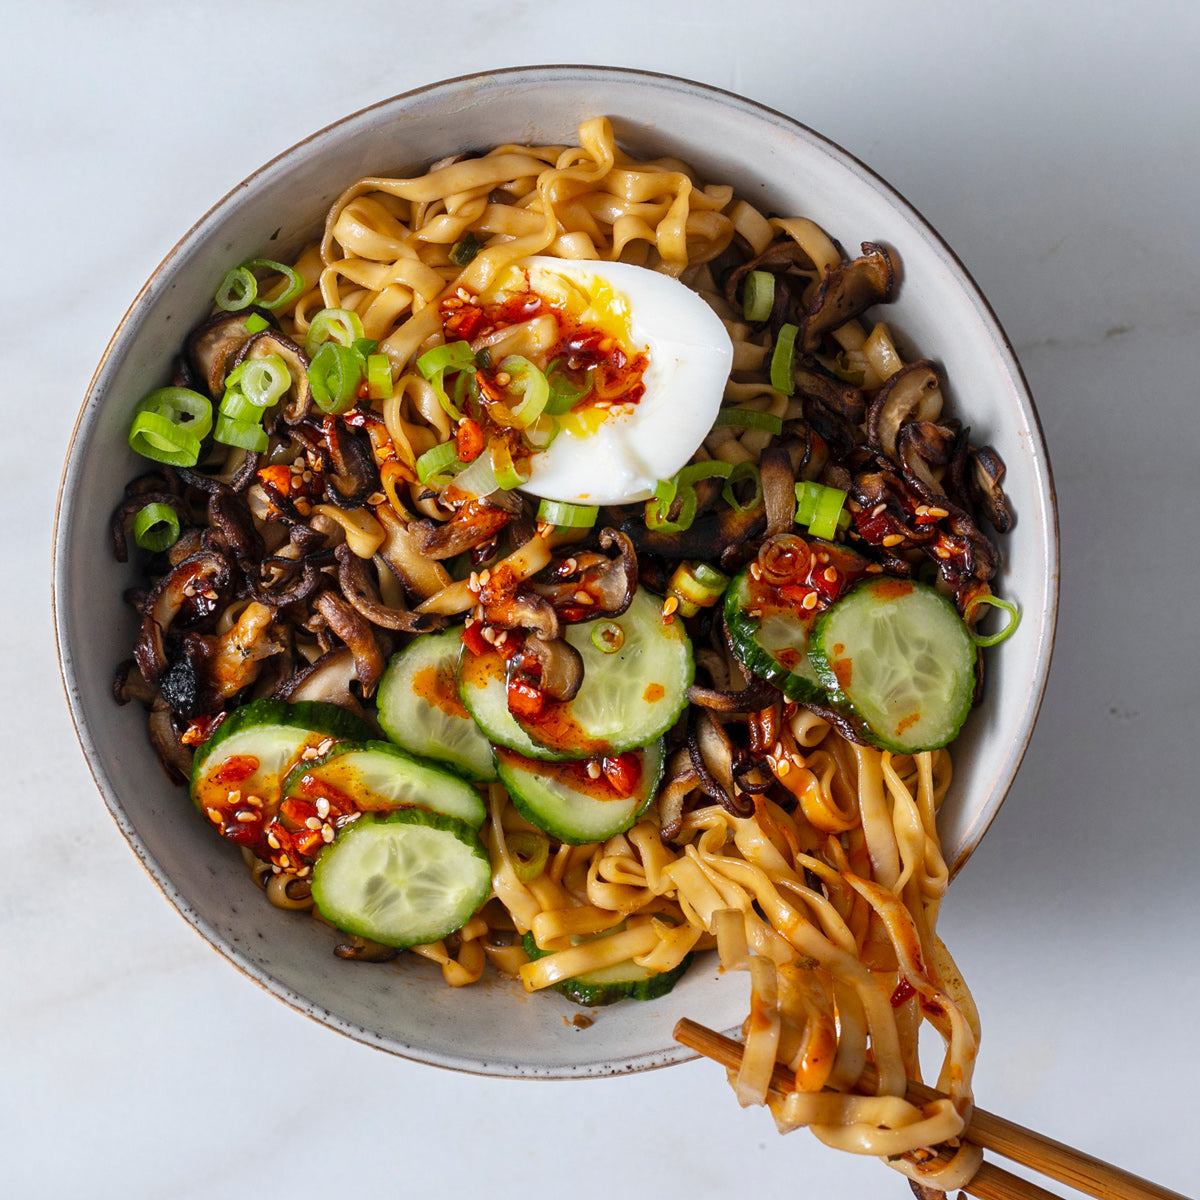 noodles with mushrooms, pickles, and eggs